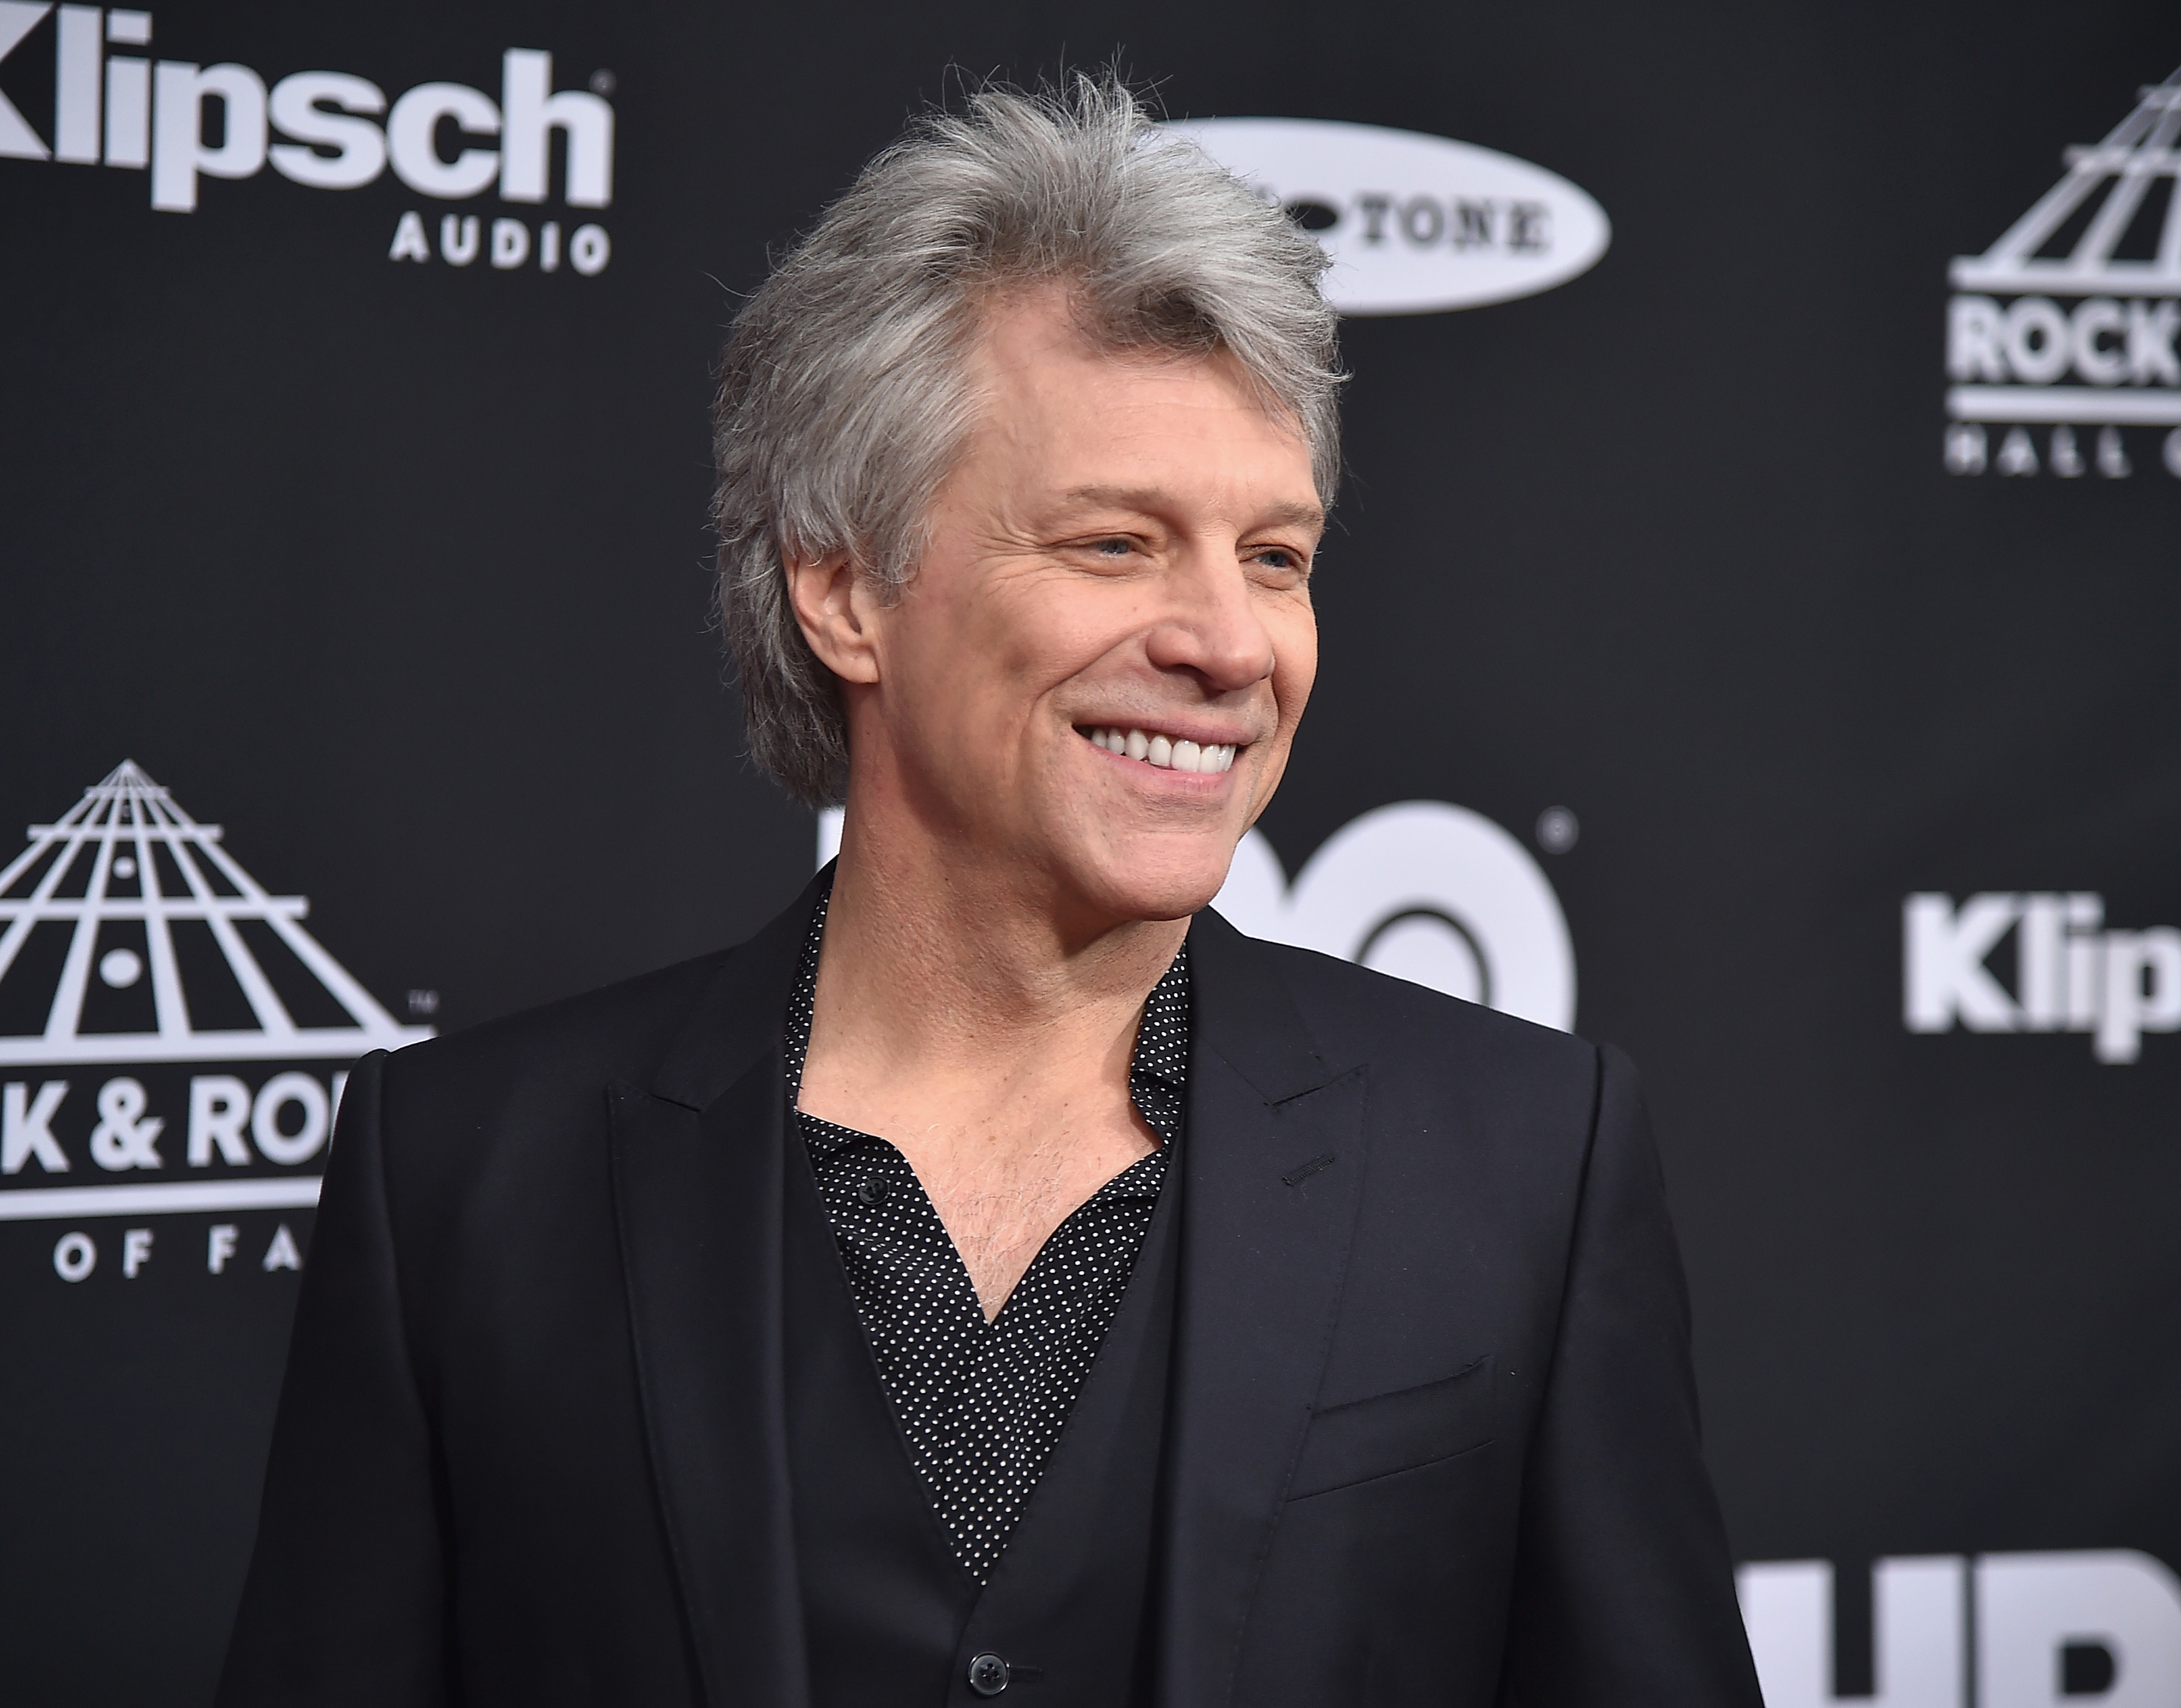 Know About Jon Bon Jovi Net Worth And Early Life